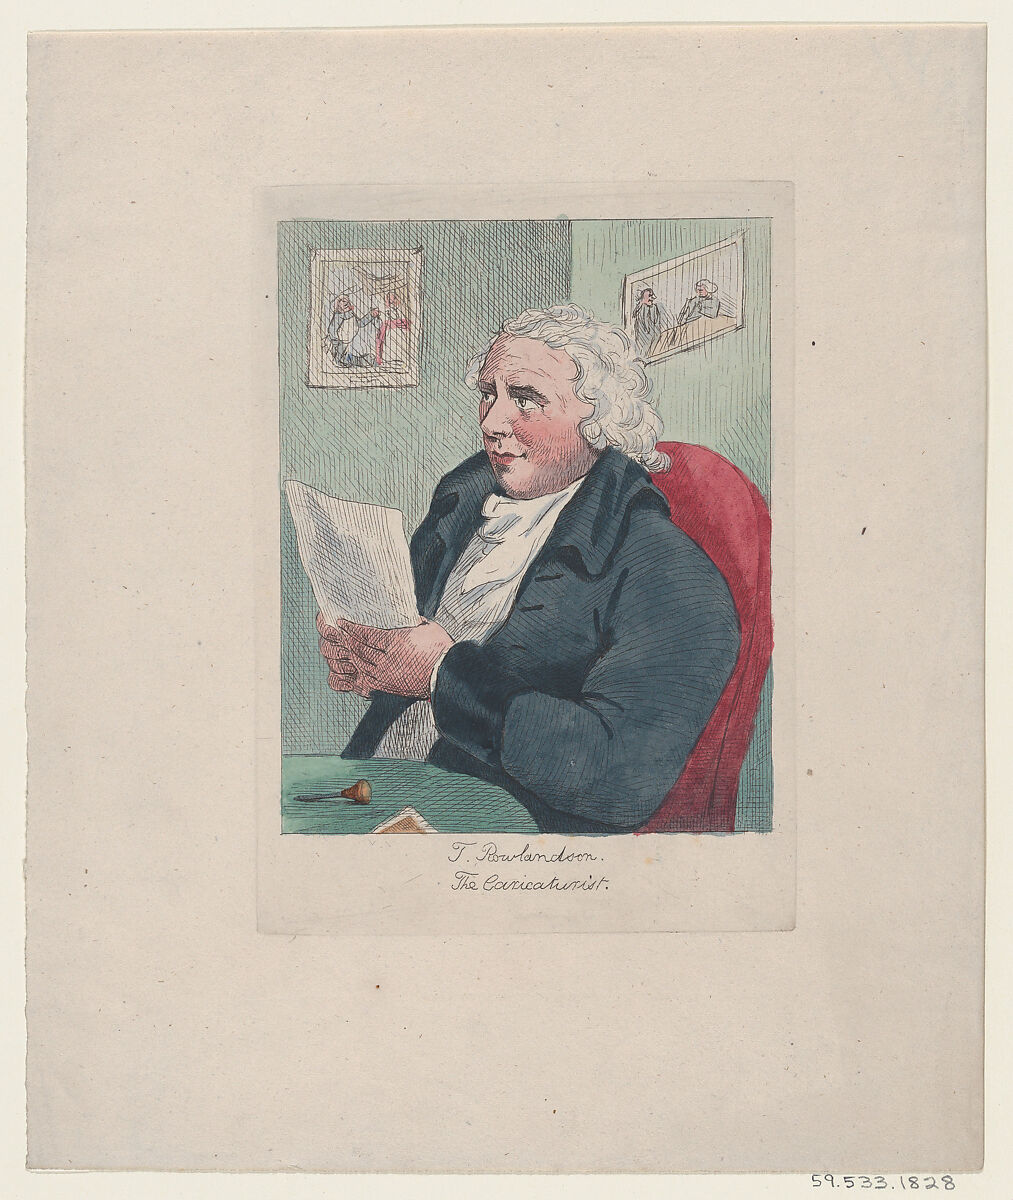 T. Rowlandson. The Caricaturist, Anonymous, British, 19th century, Facsimile of an etching, hand-colored 